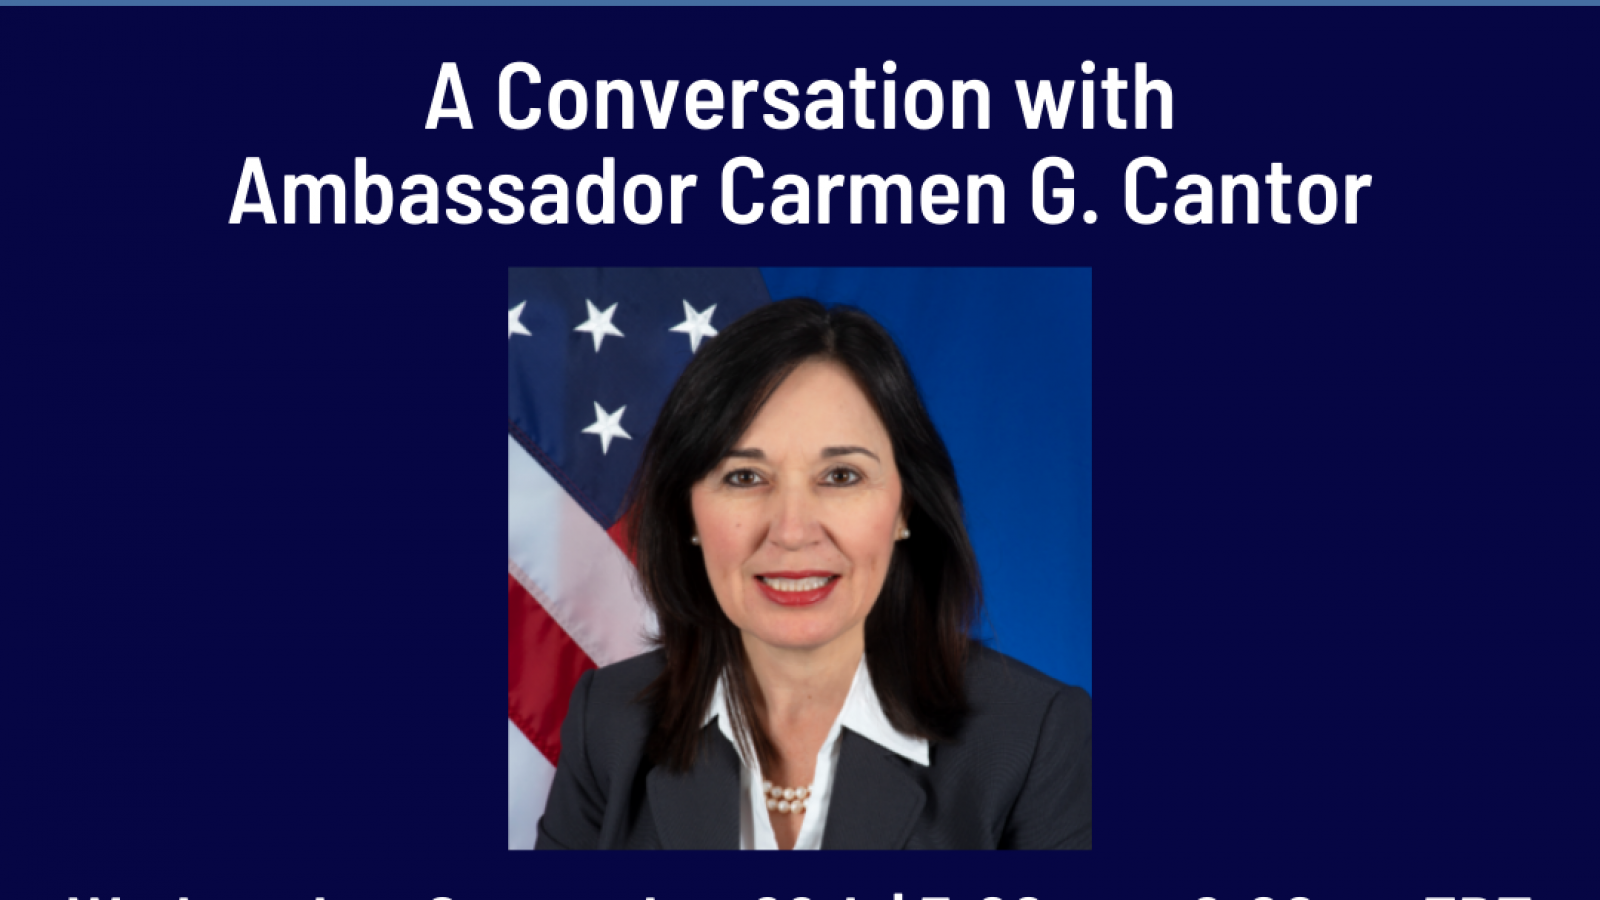 Image for the Wednesday, September 29th event with Ambassador Cantor